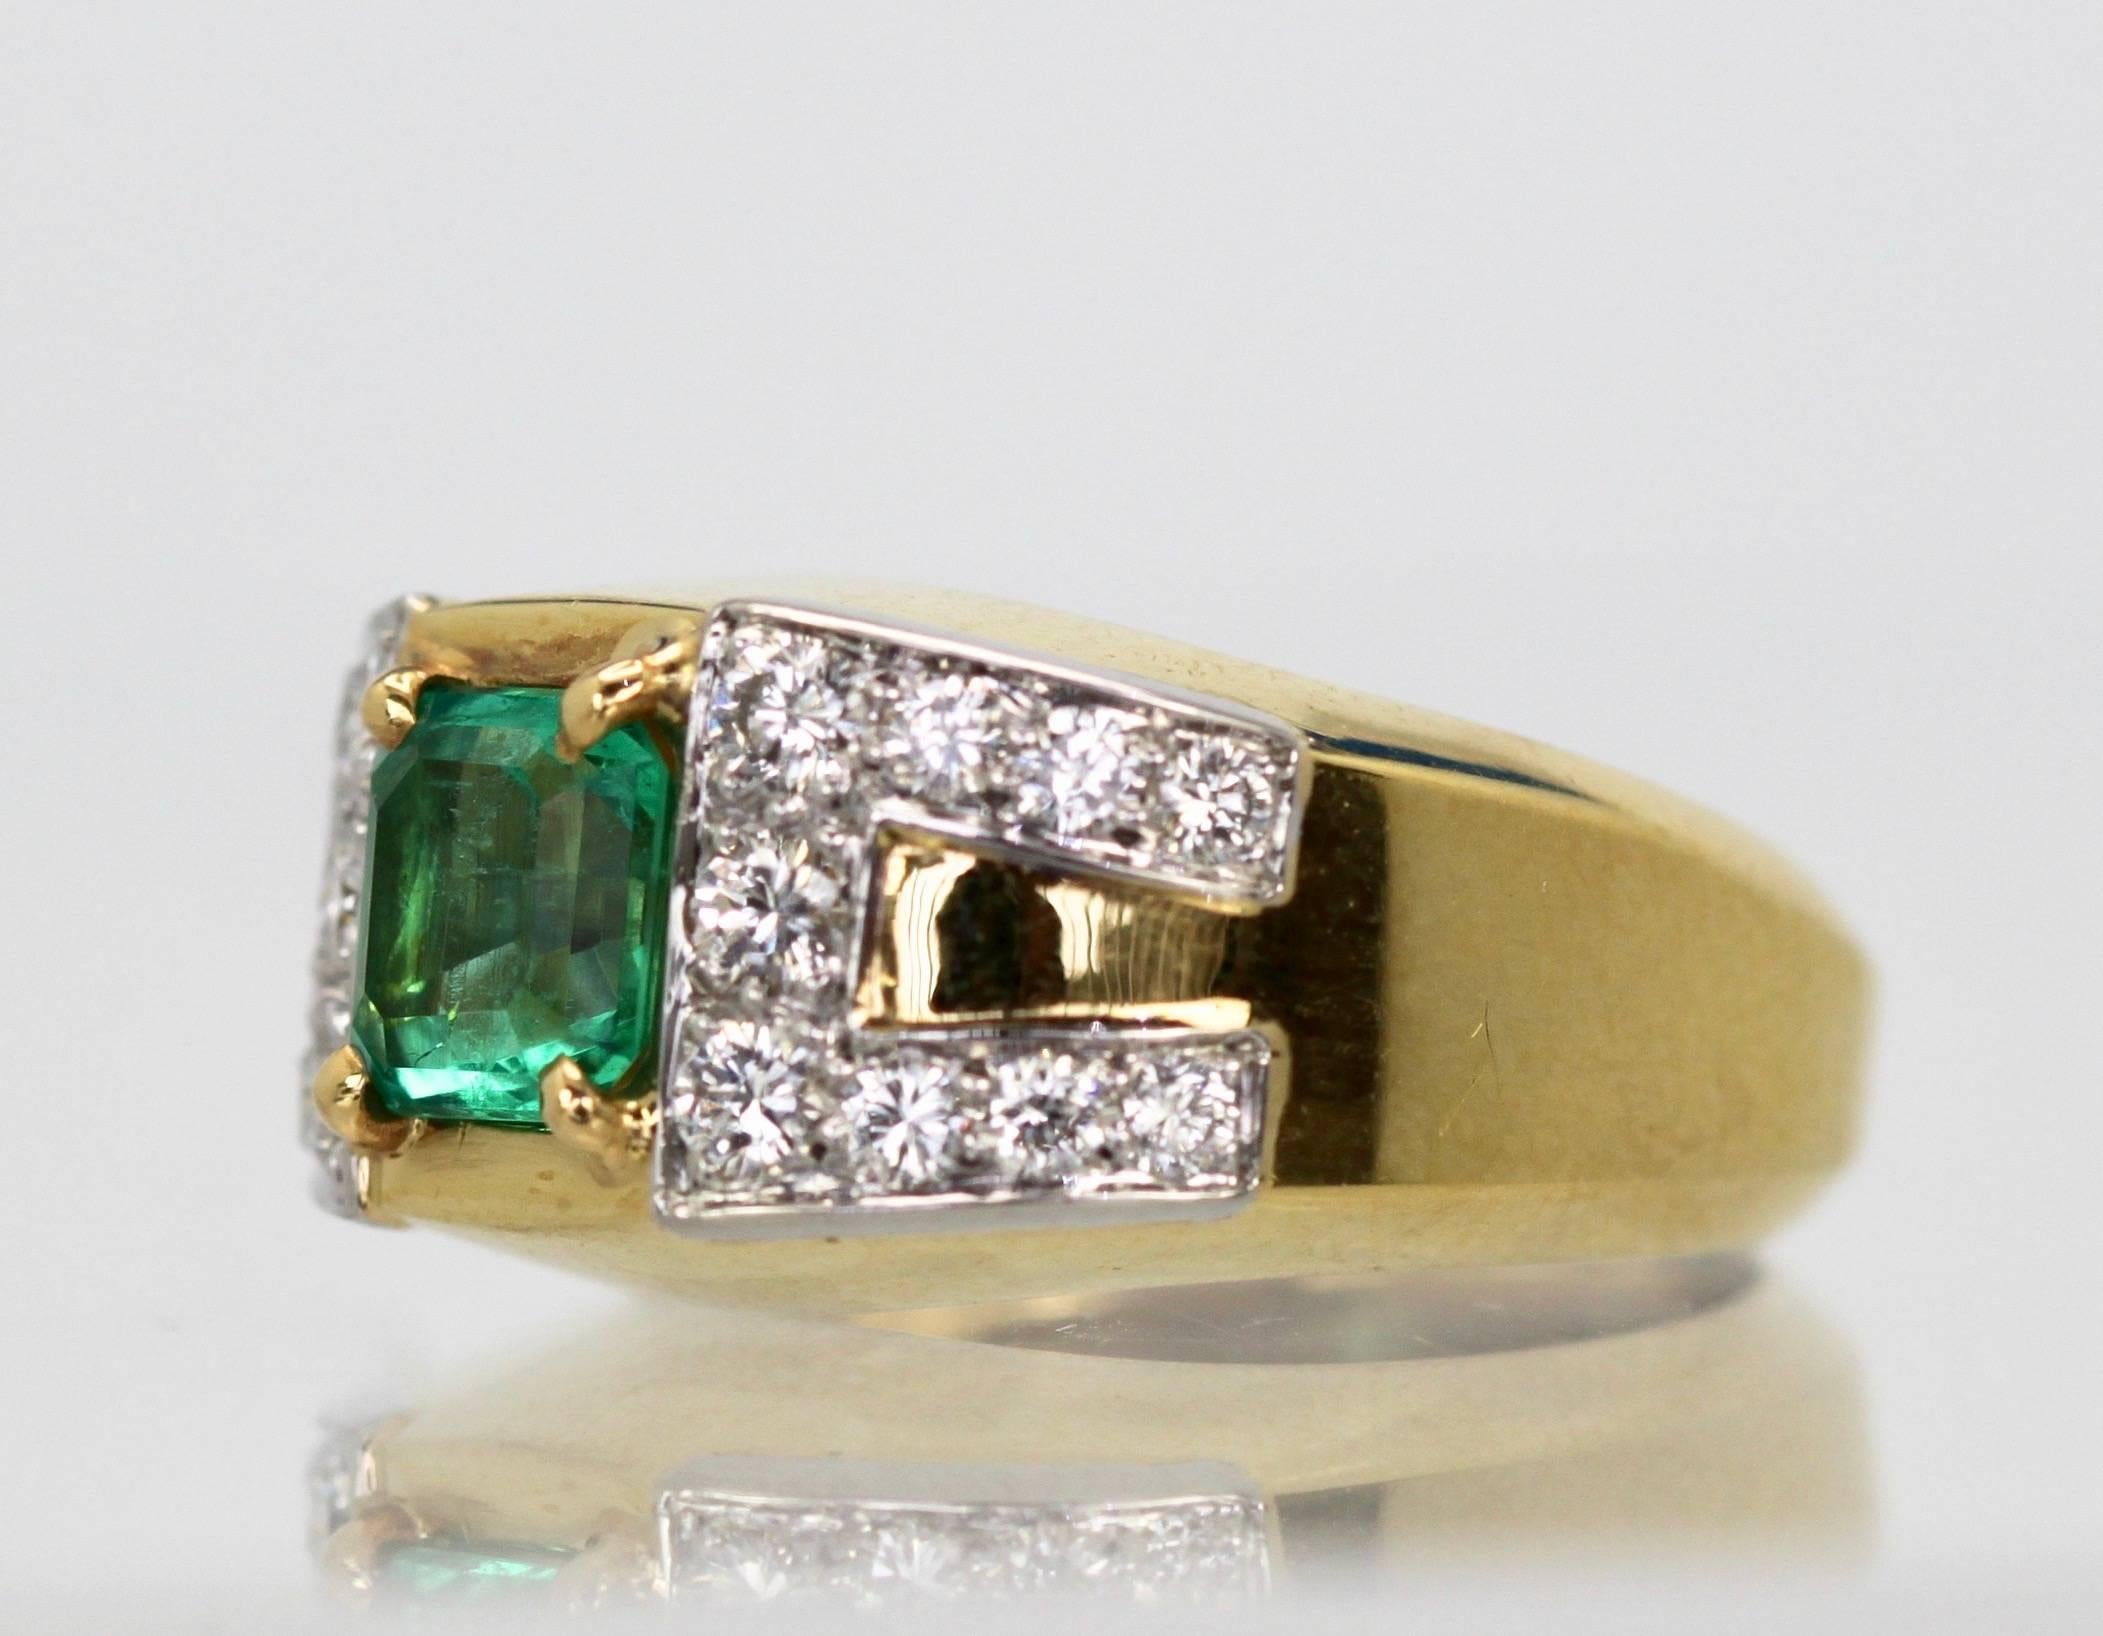 This gorgeous David Webb Emerald and Diamond ring comes out of Paris and it is stunning. The ring features a gorgeous true Emerald Green Emerald square cut stone of approximately 1.25 to 1.50 carats and 18 Diamonds totaling approximately 0.90